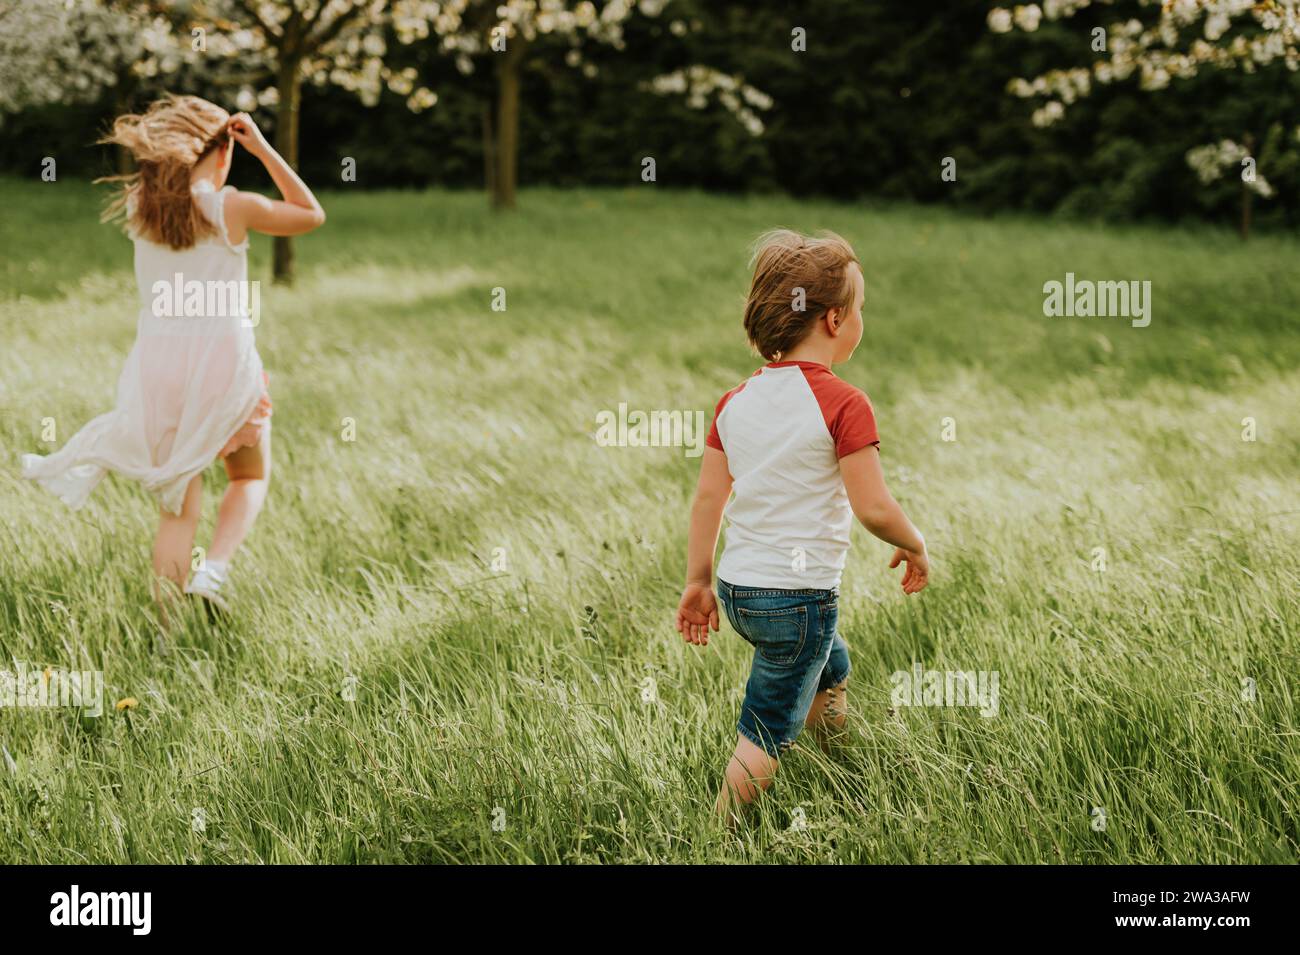 Two adorable kids playing together in spring garden on a very windy day, family spending time outdoors Stock Photo